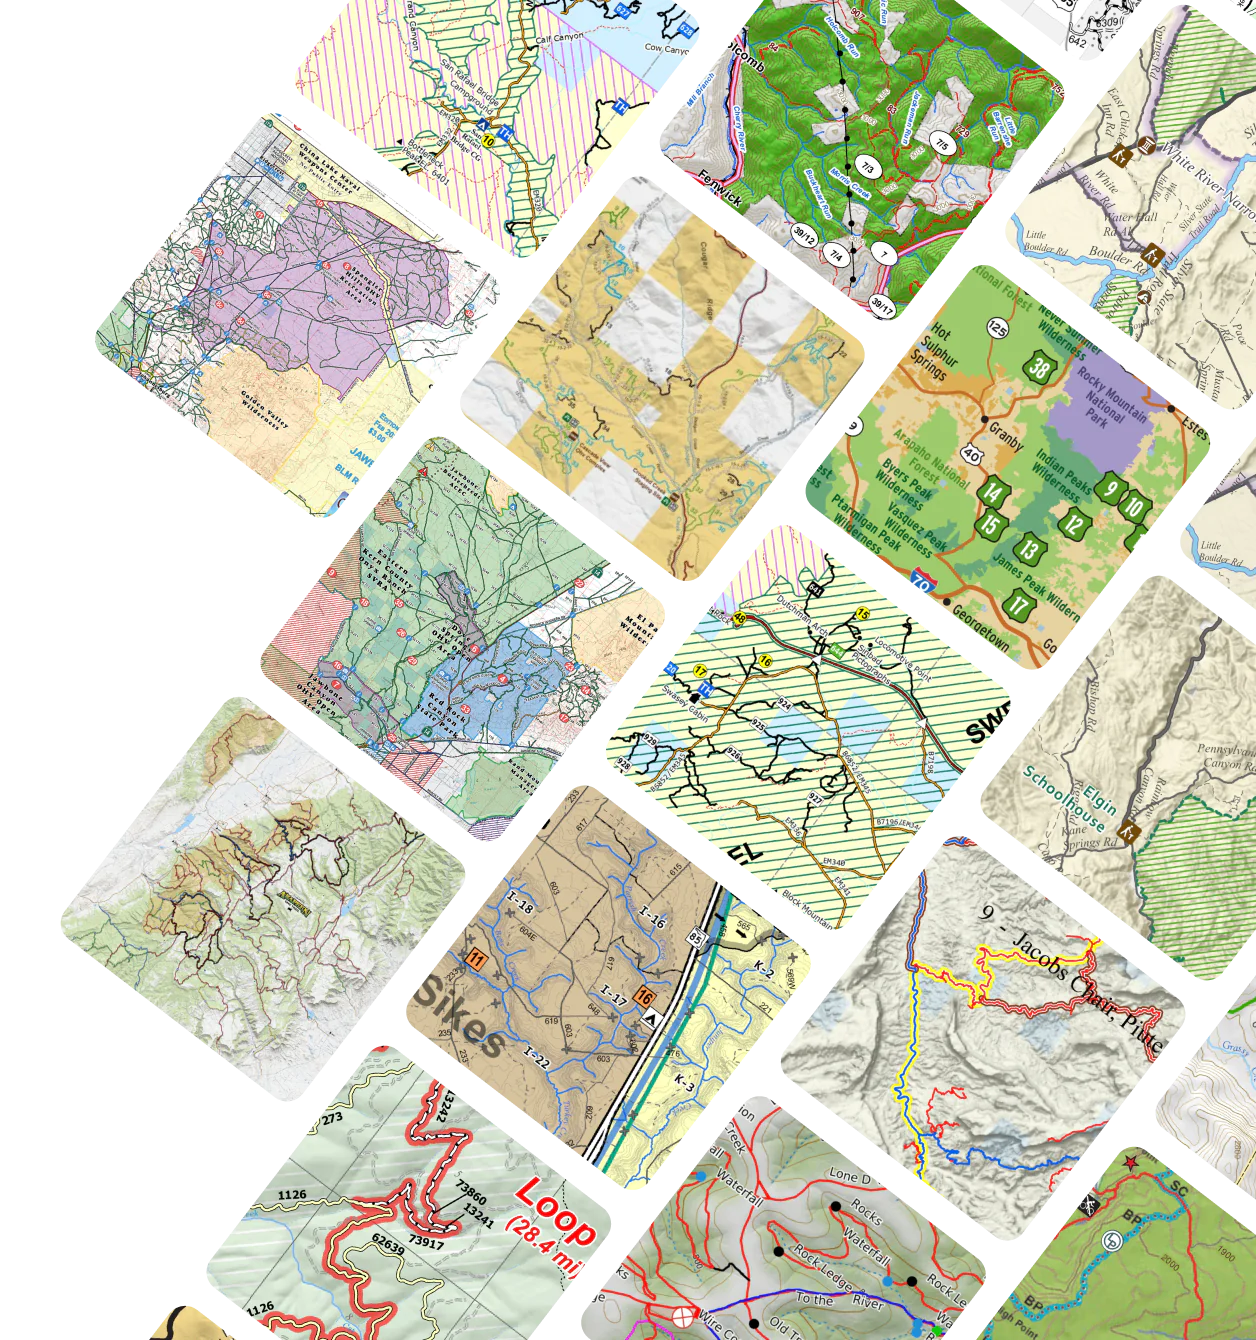 A variety of different maps displayed as tiles